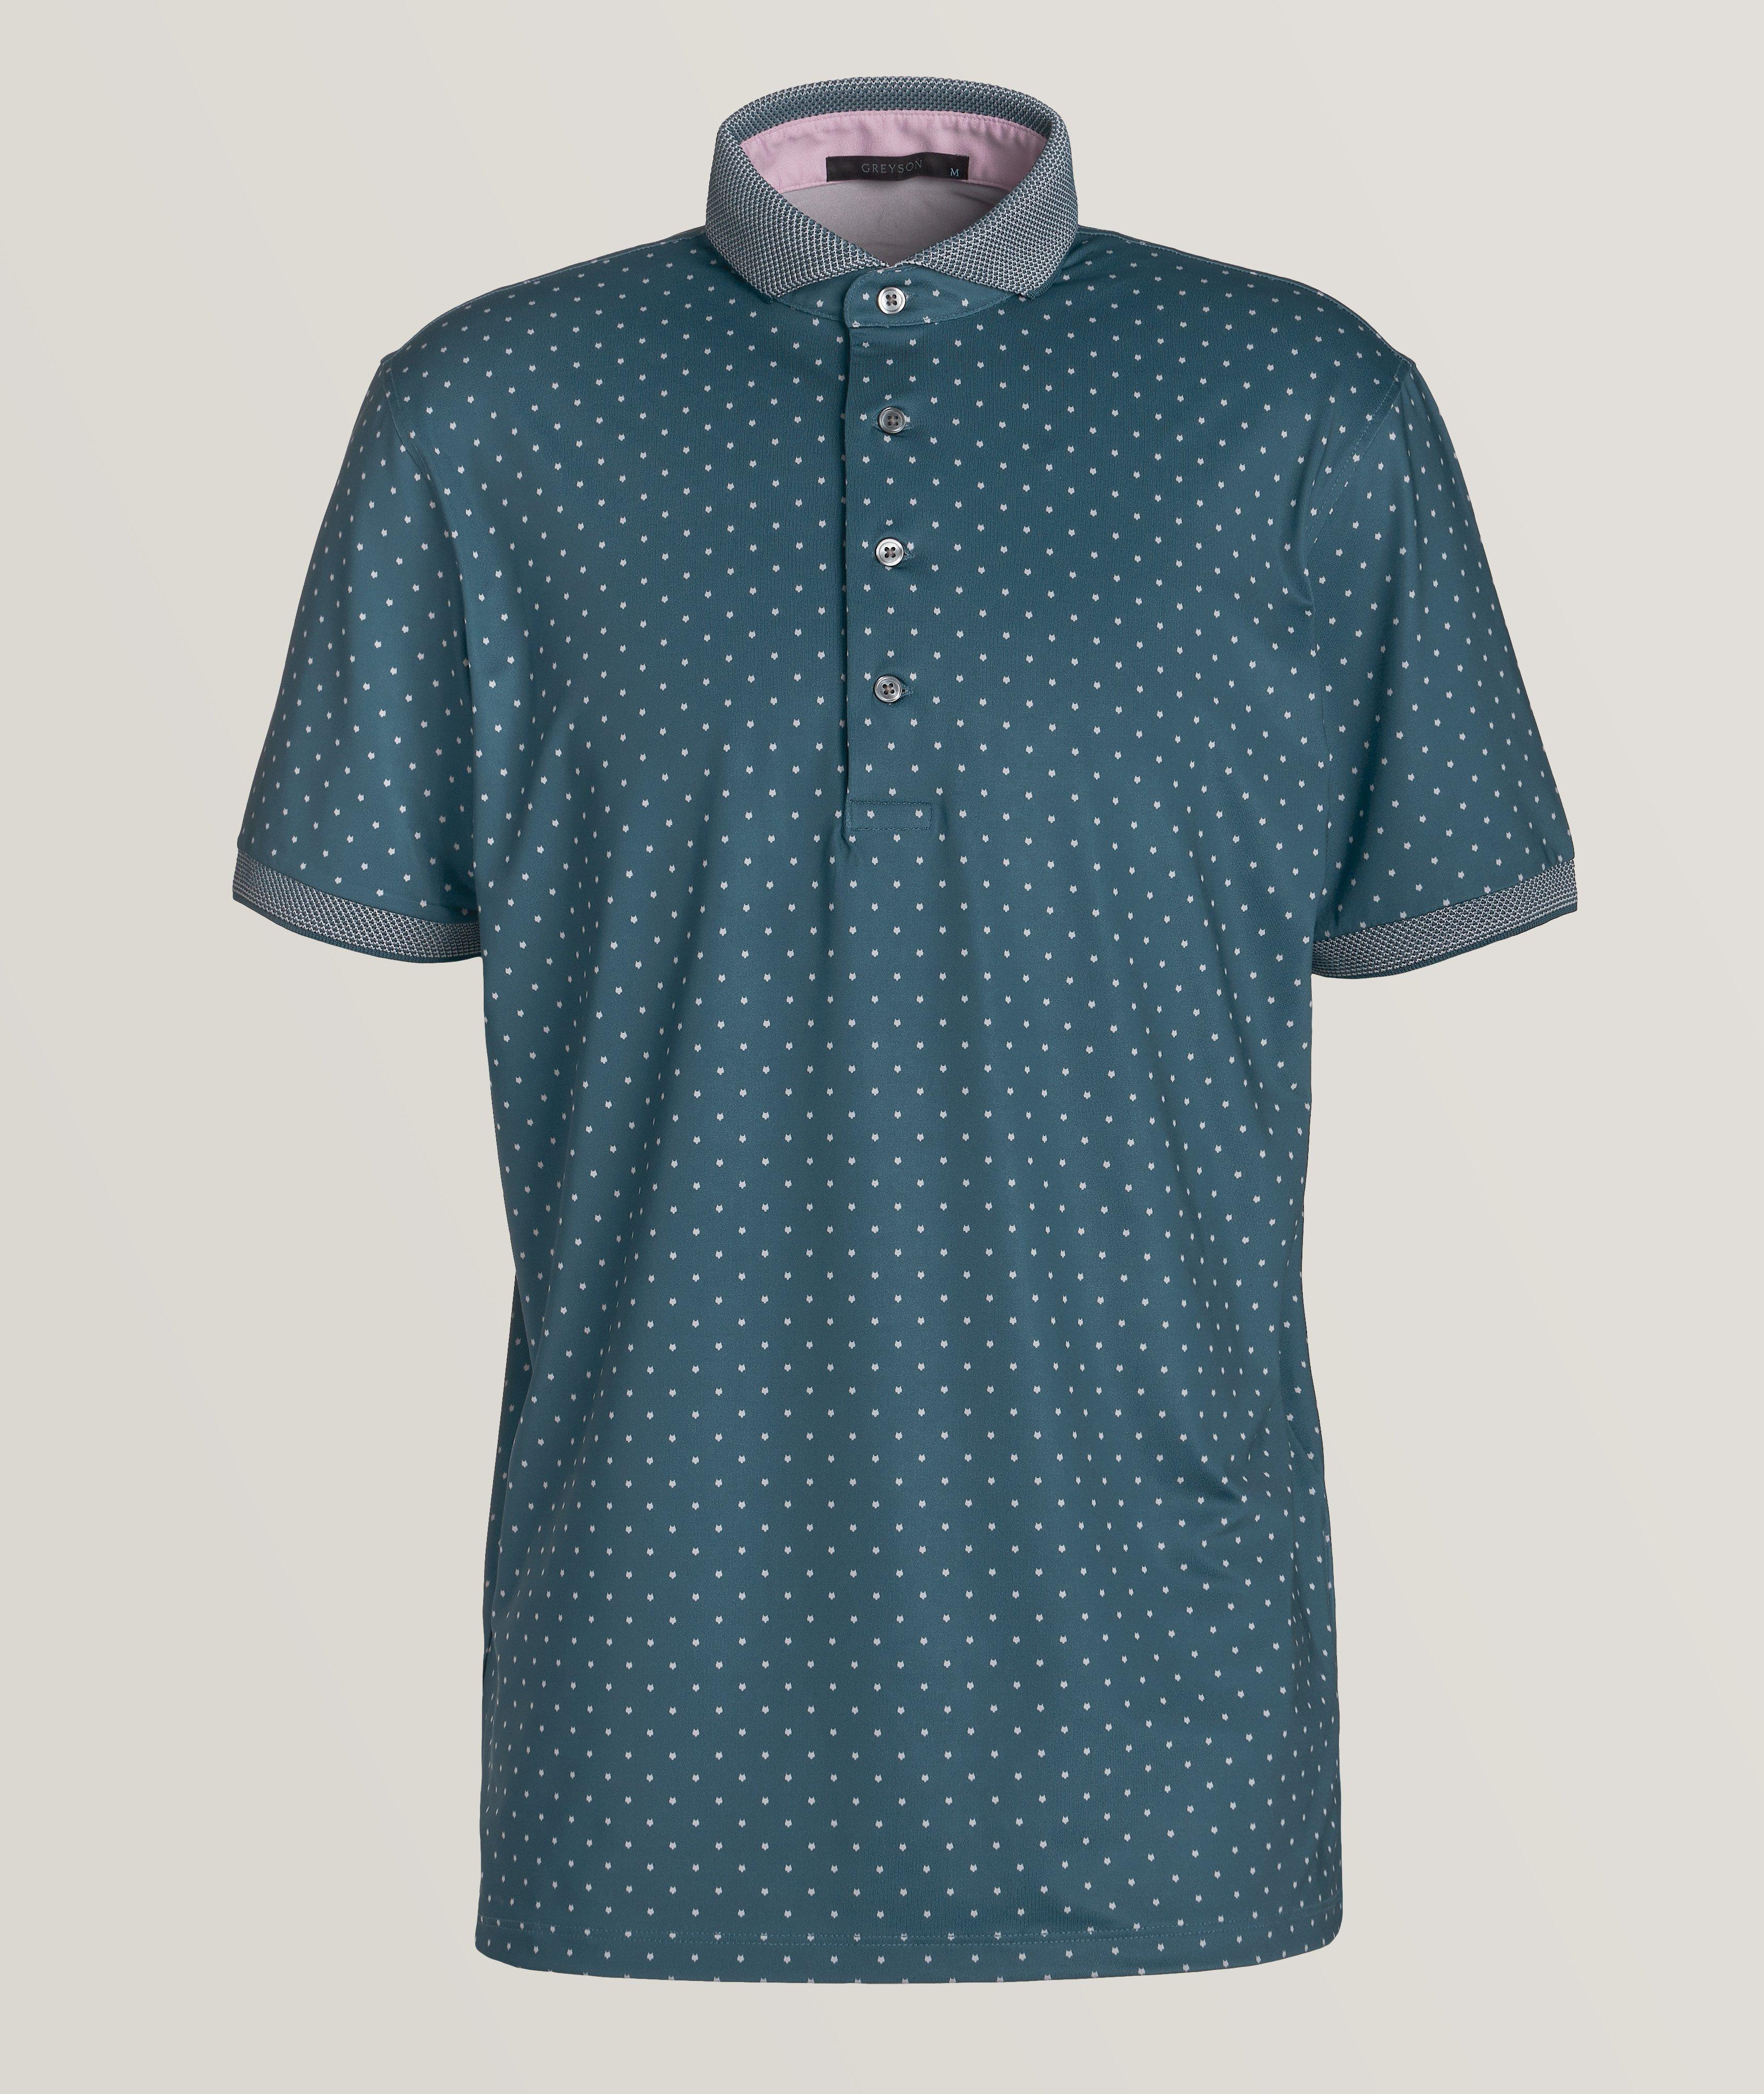 Greyson Icon Patterned Technical Button-Down Polo image 0